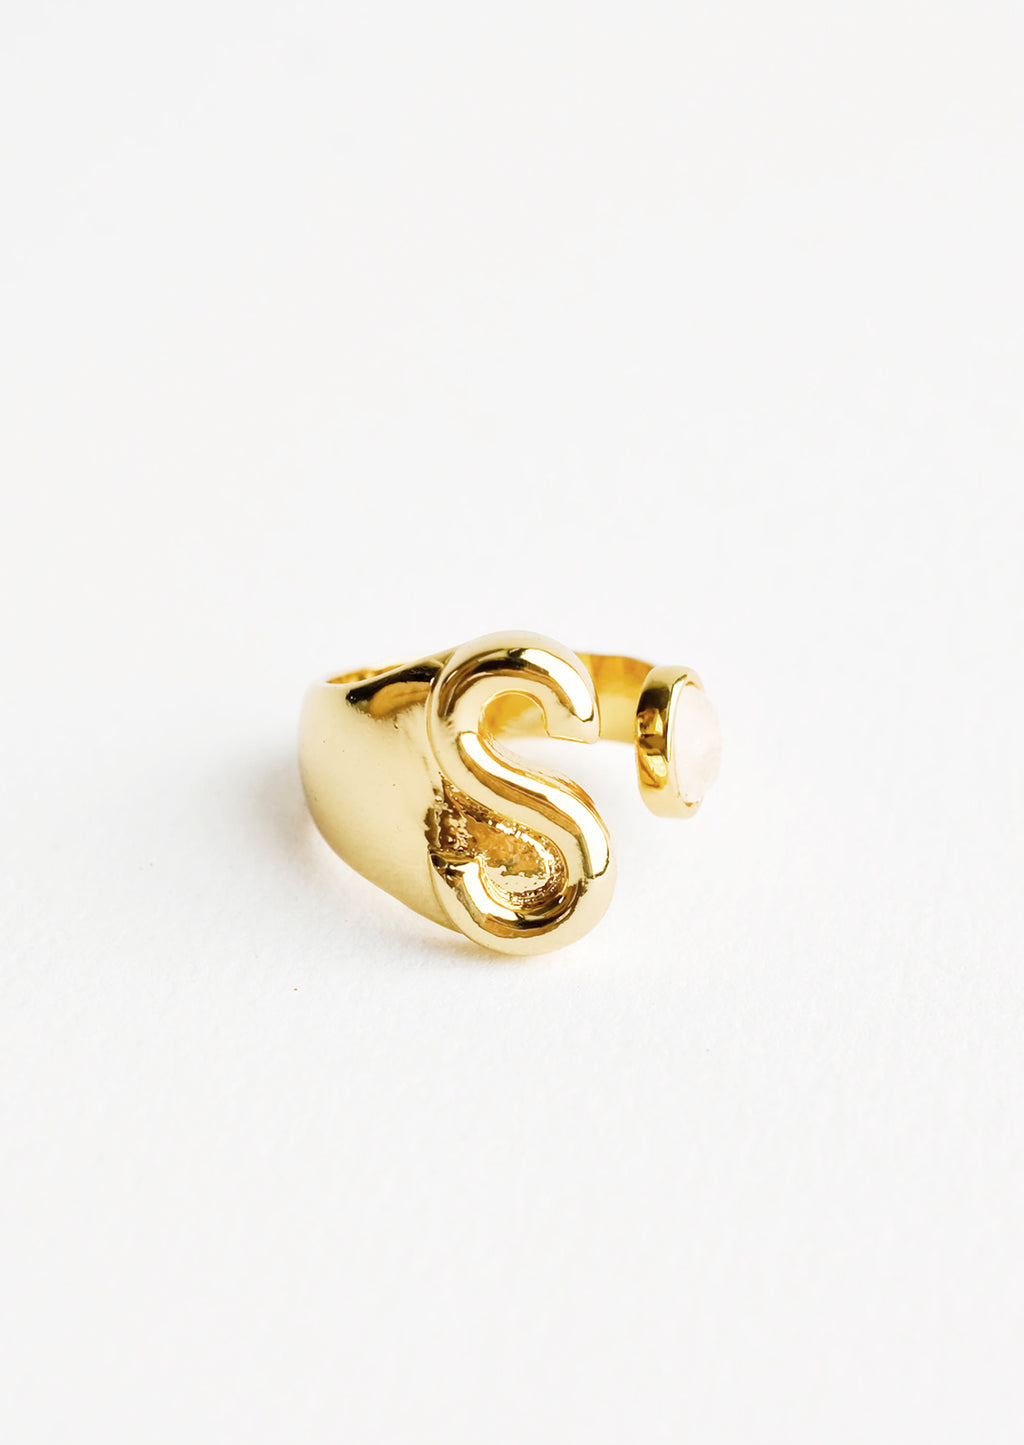 S: Yellow gold ring with letter S and oval glass crystal, and wide adjustable band.